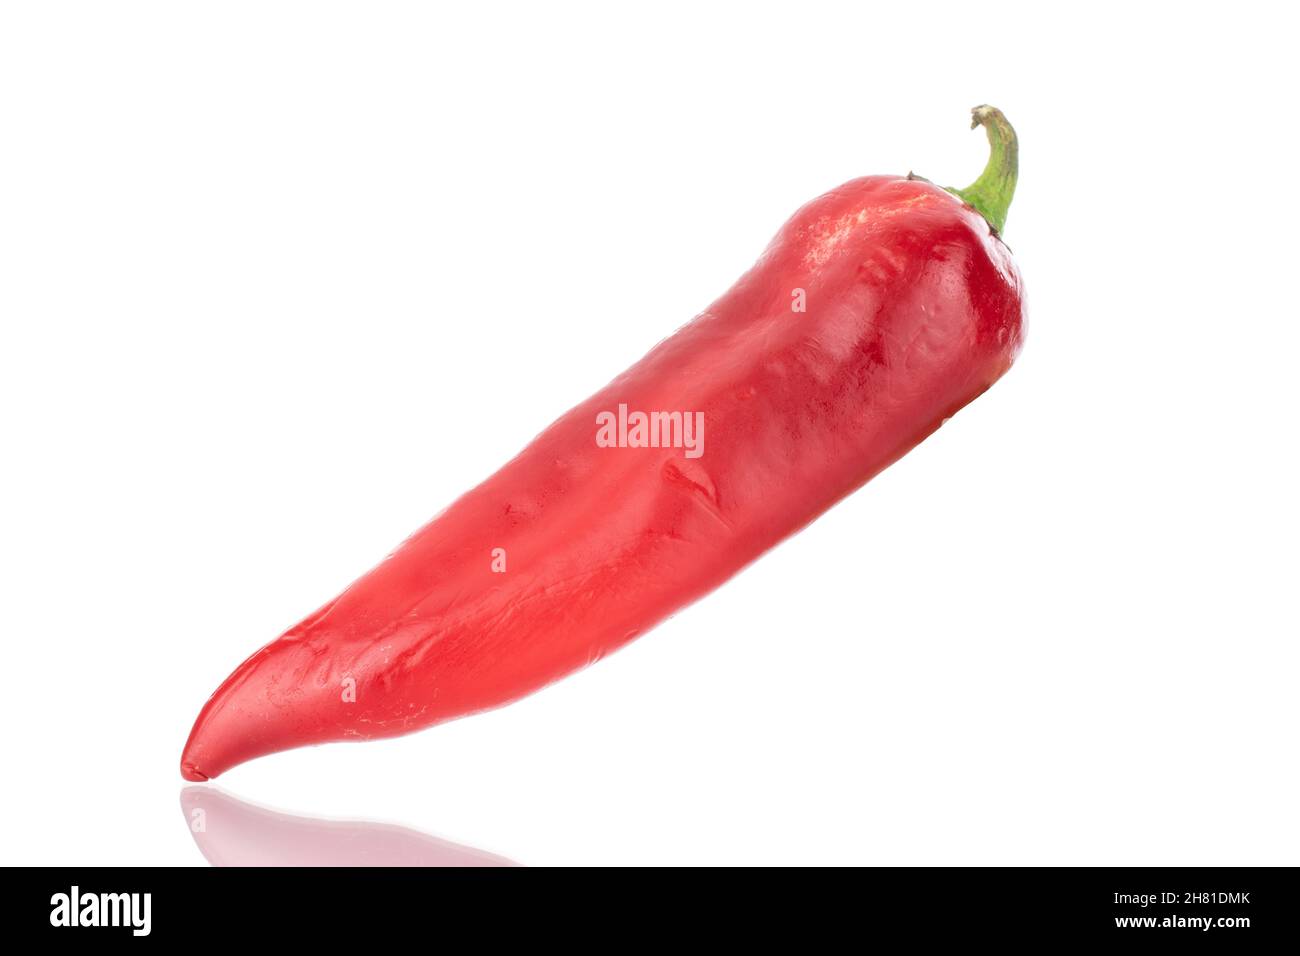 One red sweet pepper, close-up, isolated on white. Stock Photo